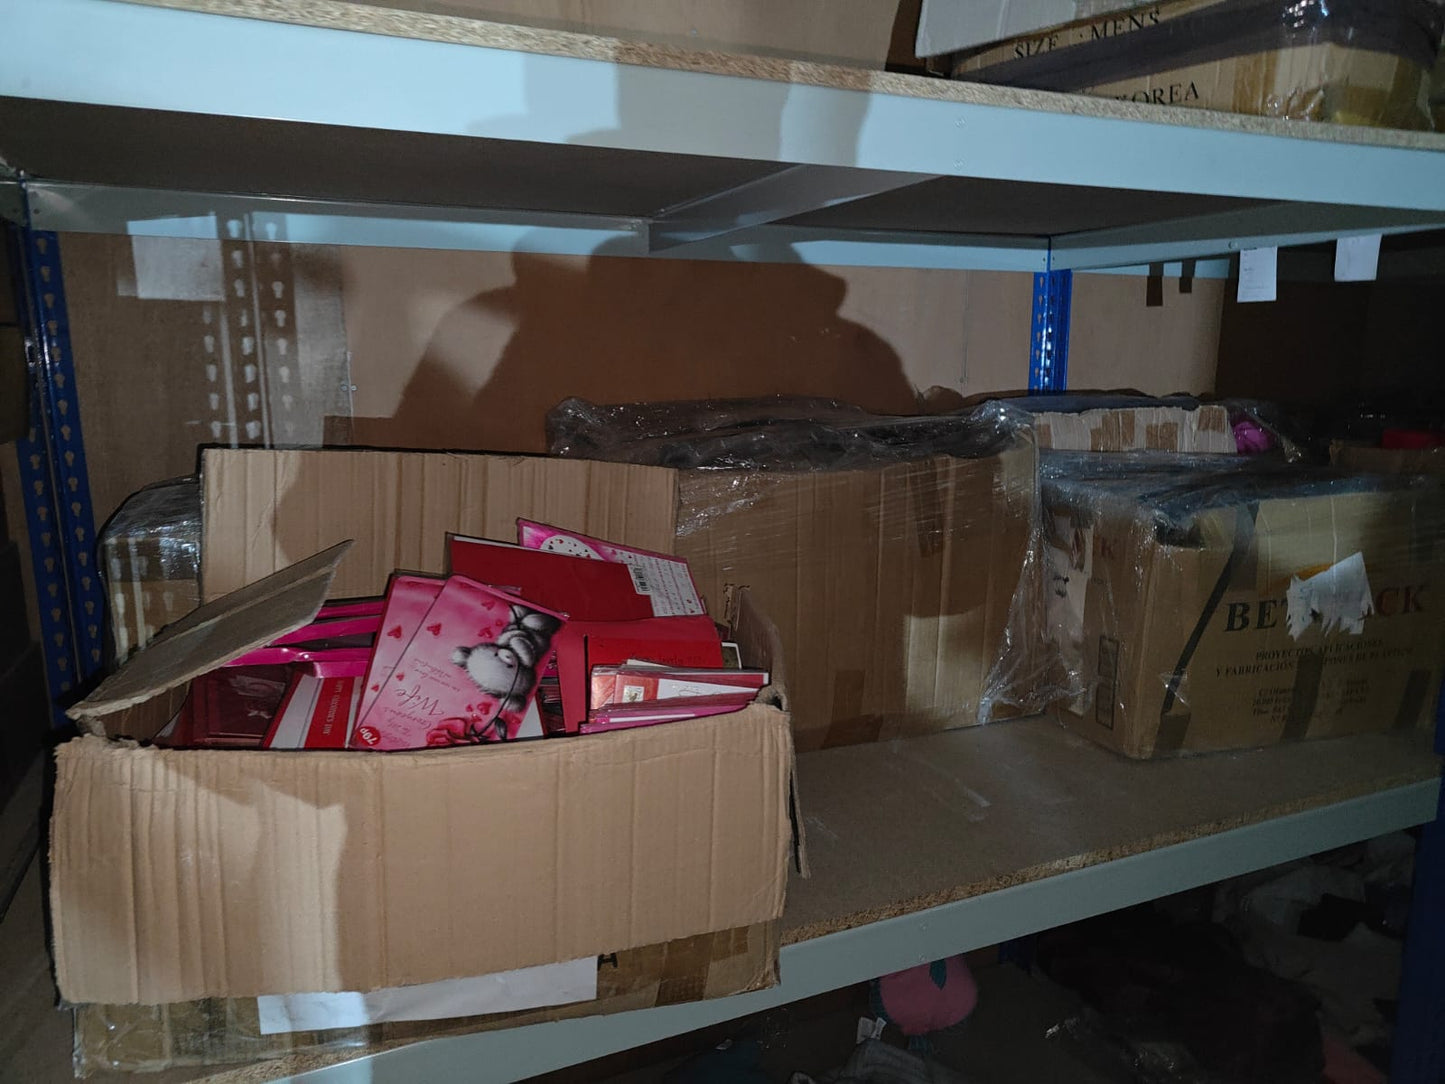 Bid on FULL CONTENTS OF POUNDWORLD SHOP INCLUDING RACKING EVERYTHING YOU SEE - SEE IMAGES- Buy &amp; Sell on Auction with EAMA Group